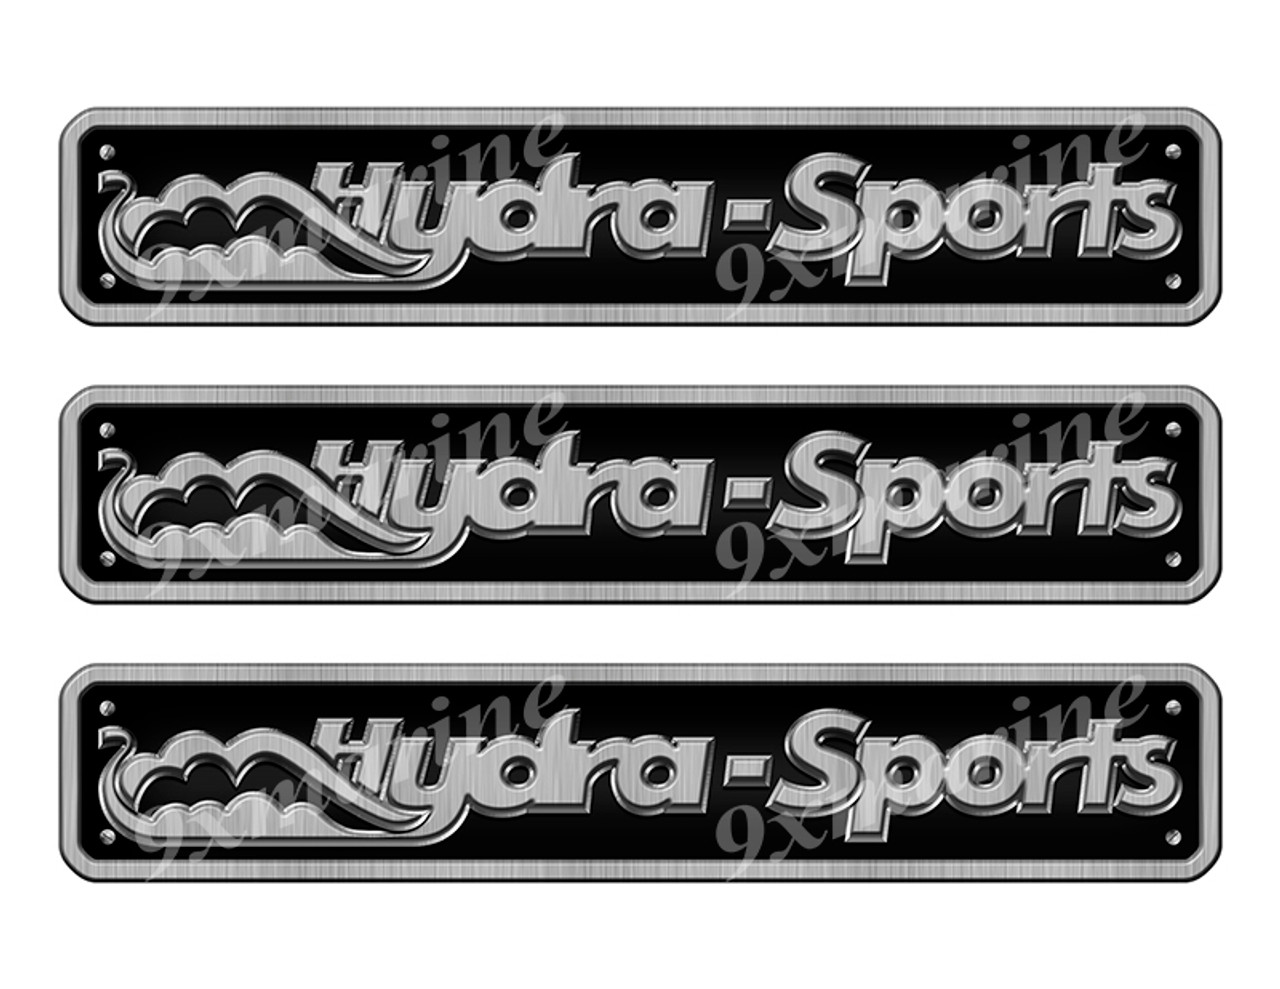 3 Hydra-Sports Stickers - 10" long set. Replica Name Plate in Vinyl